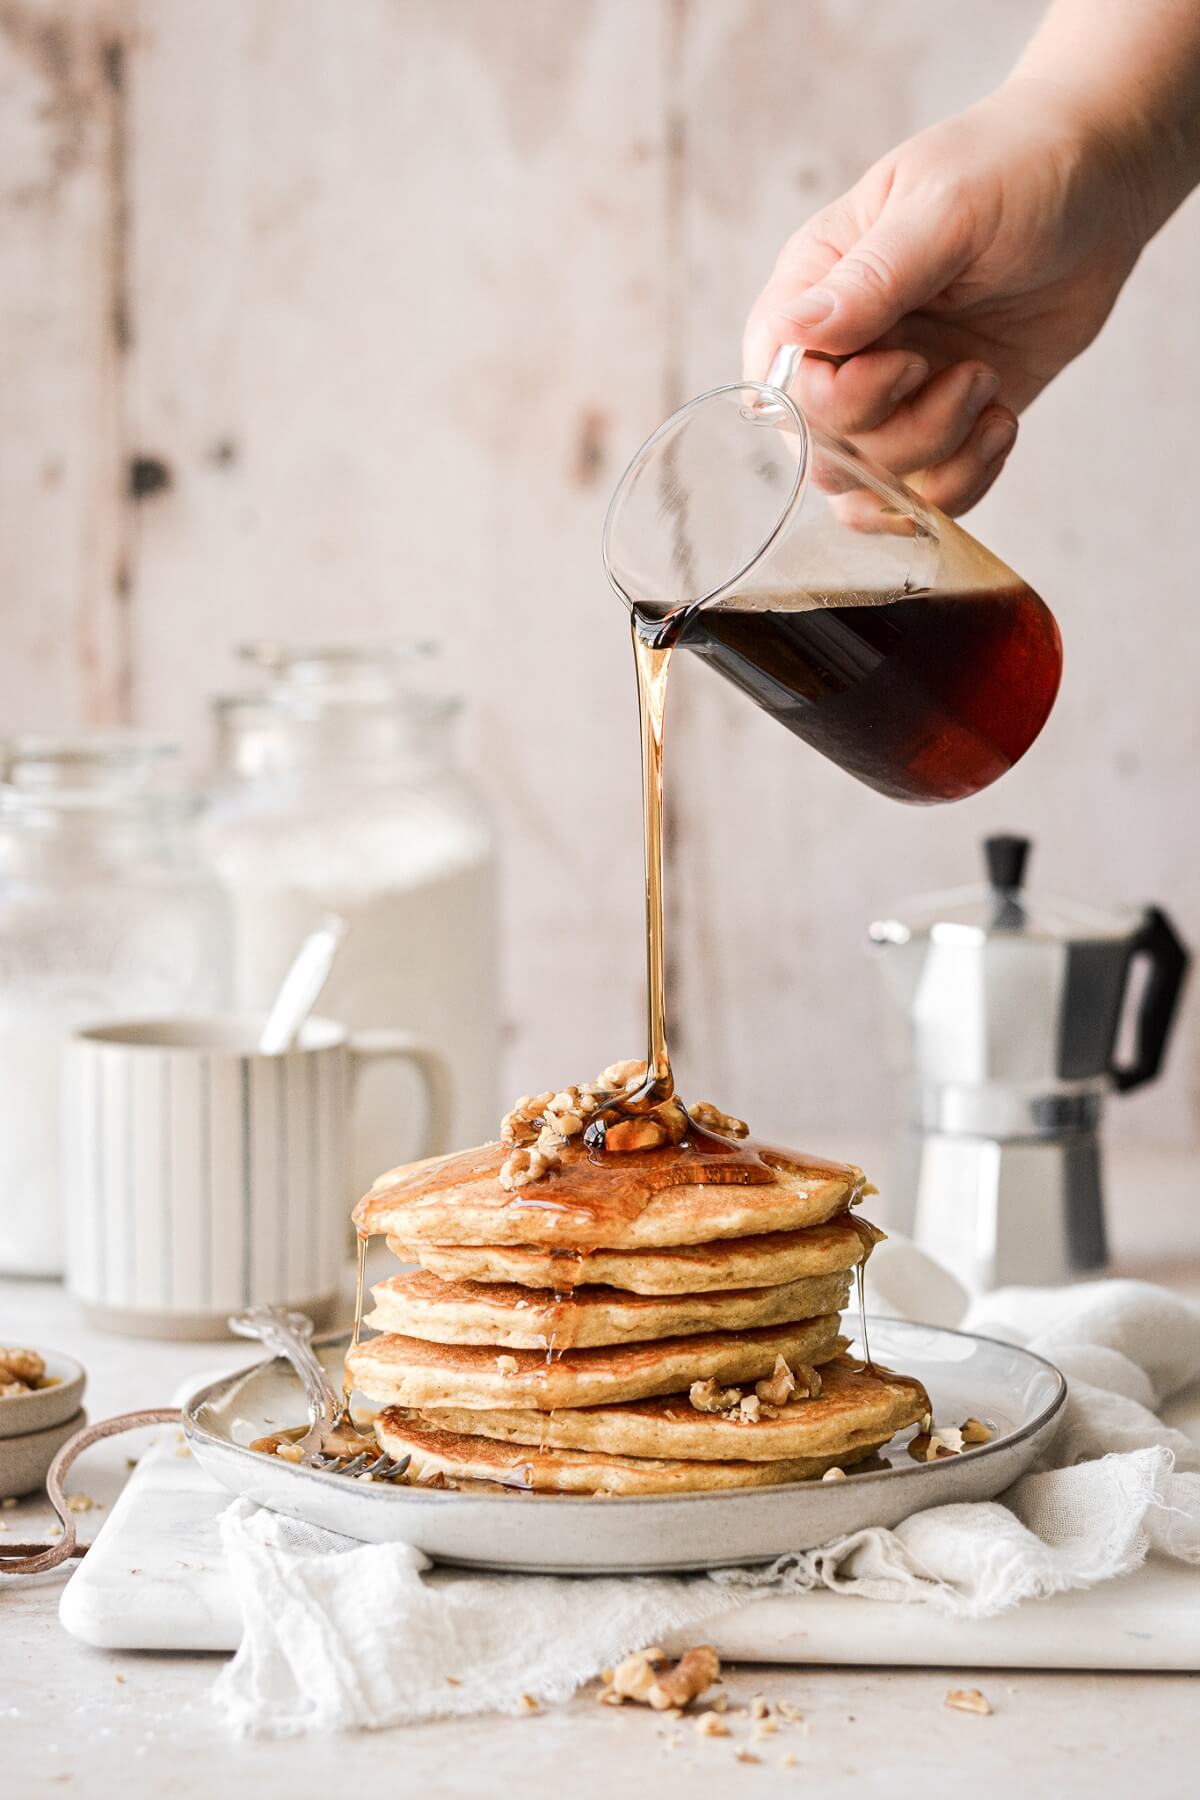 Stack of whole wheat cornmeal pancakes with syrup being poured on top.